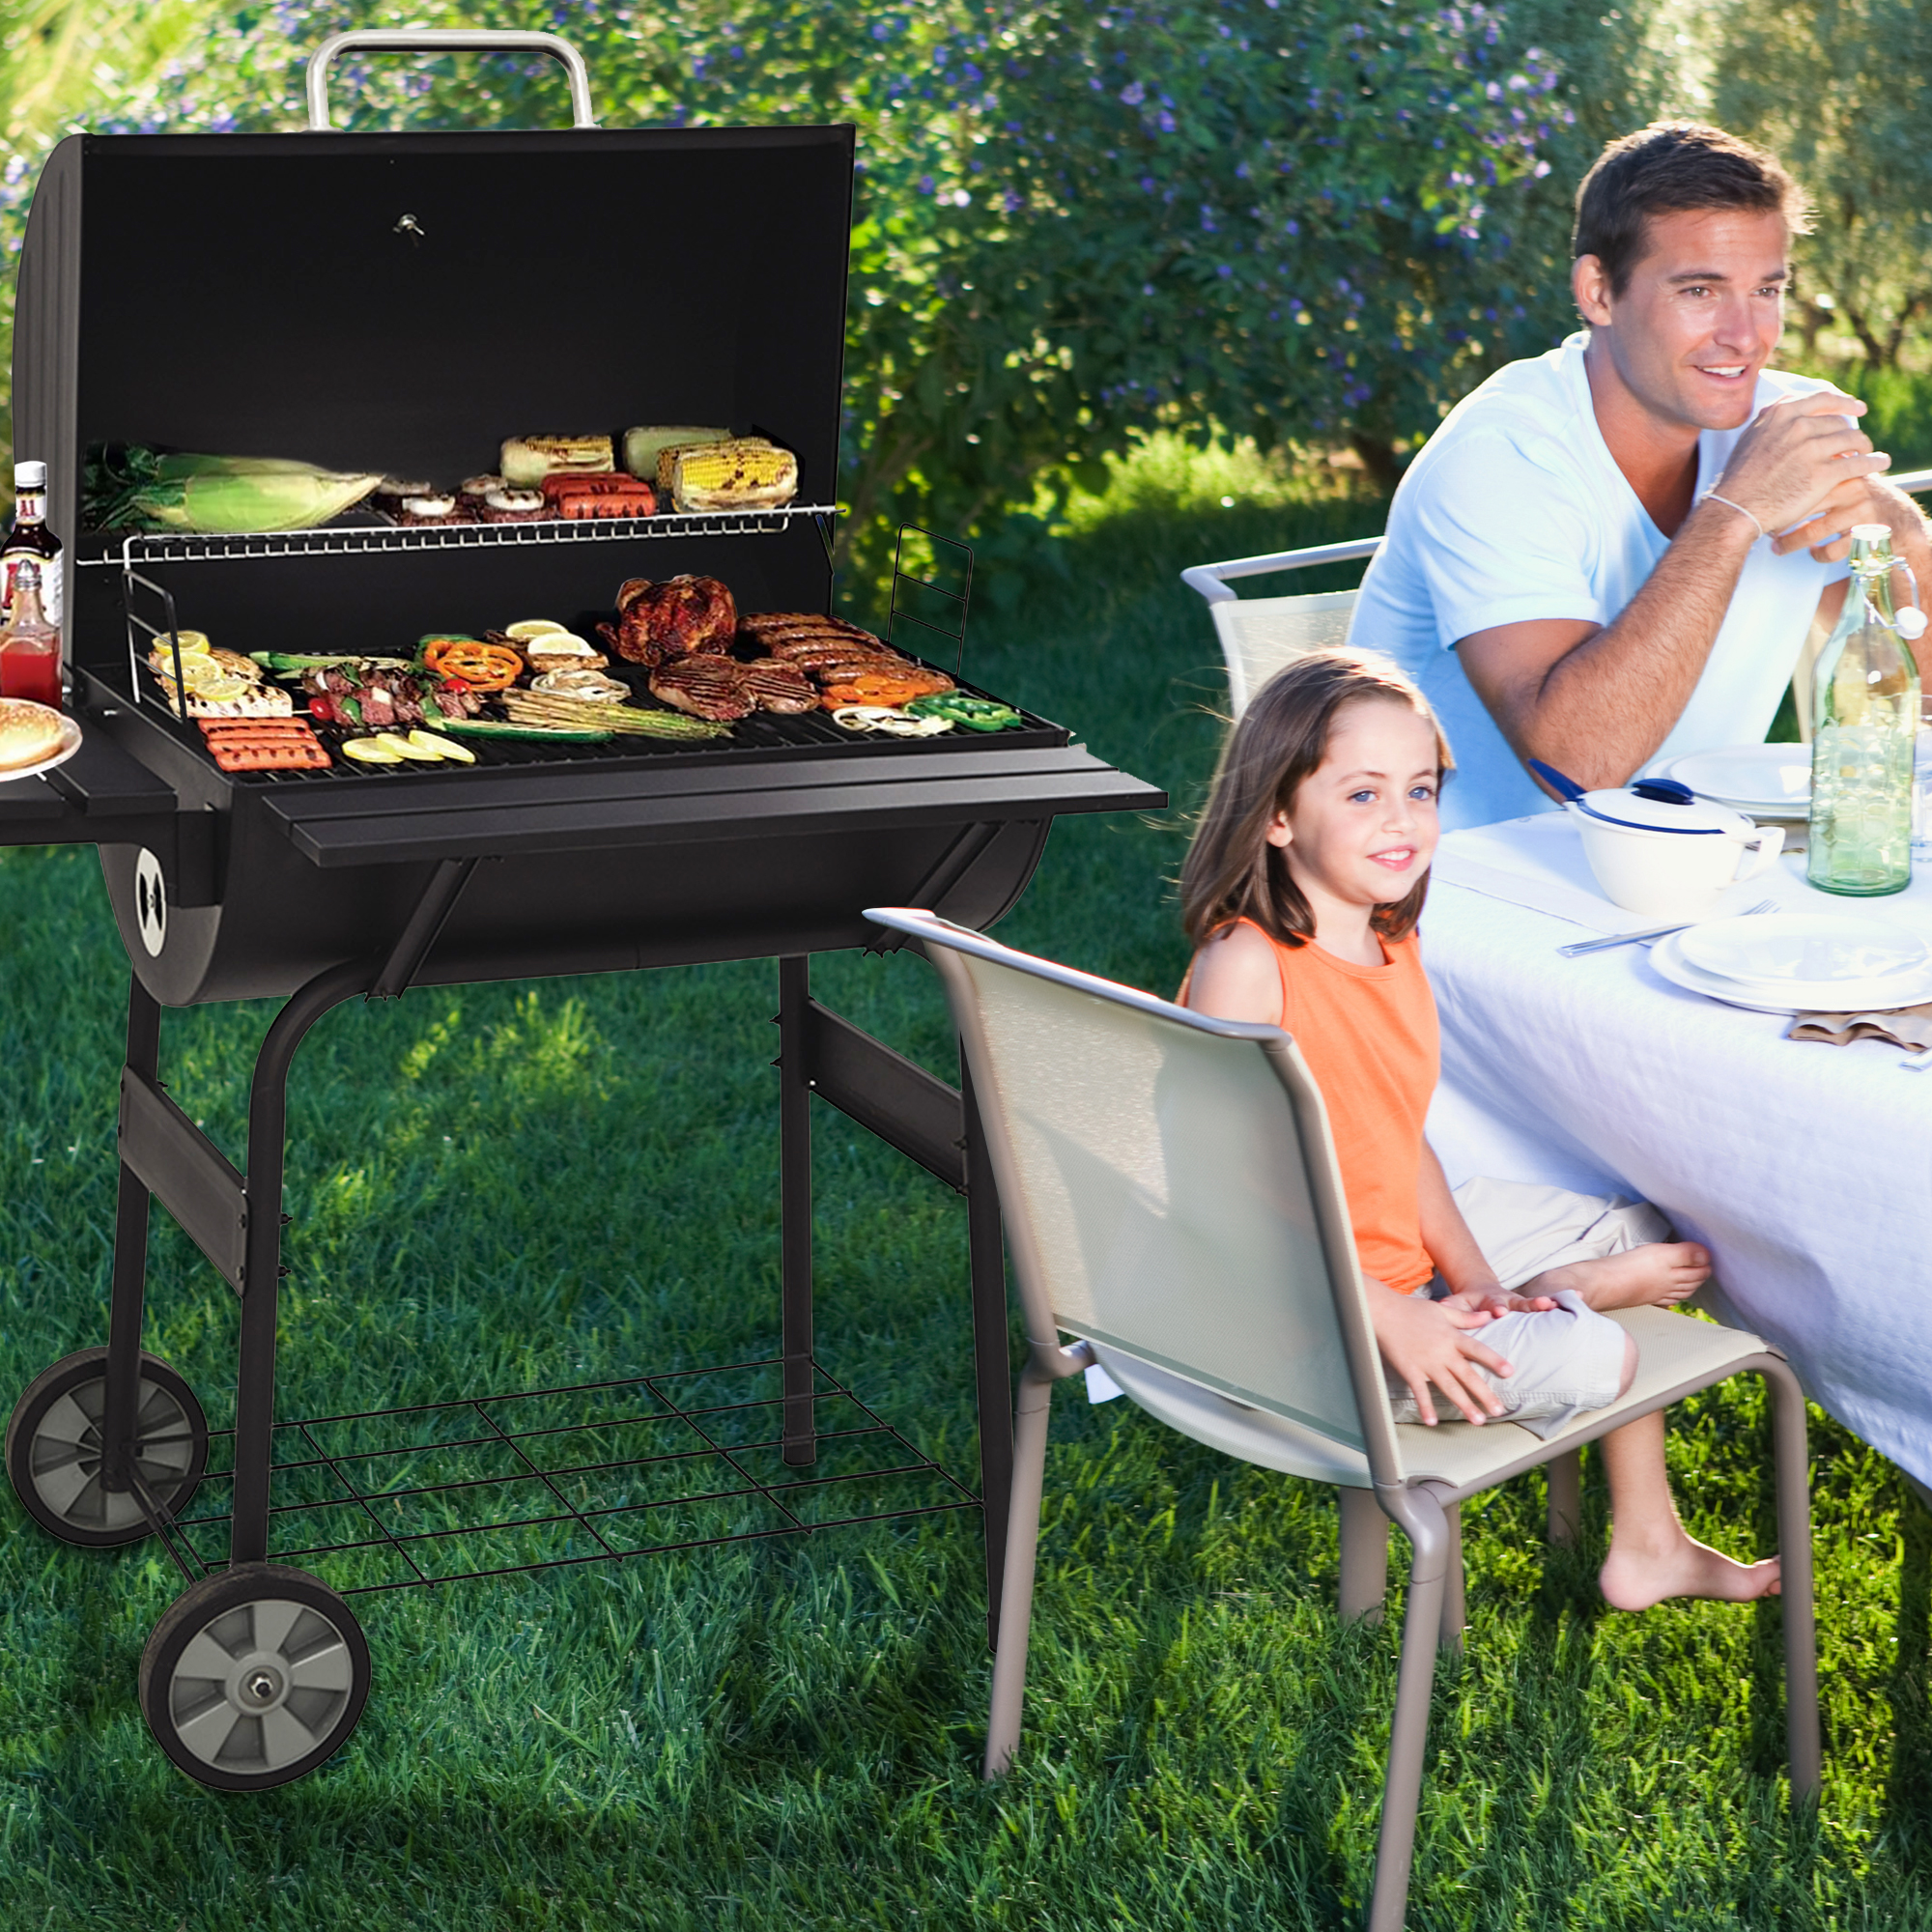 Patio Outdoor Charcoal Grill for Patio, 30'' Portable BBQ Charcoal Grill with Metal Shelf, BBQ Charcoal Grill w/Temperature Gauge and Metal Grate, Cooking Grate for Steak Chicken, SS1062 - image 2 of 8